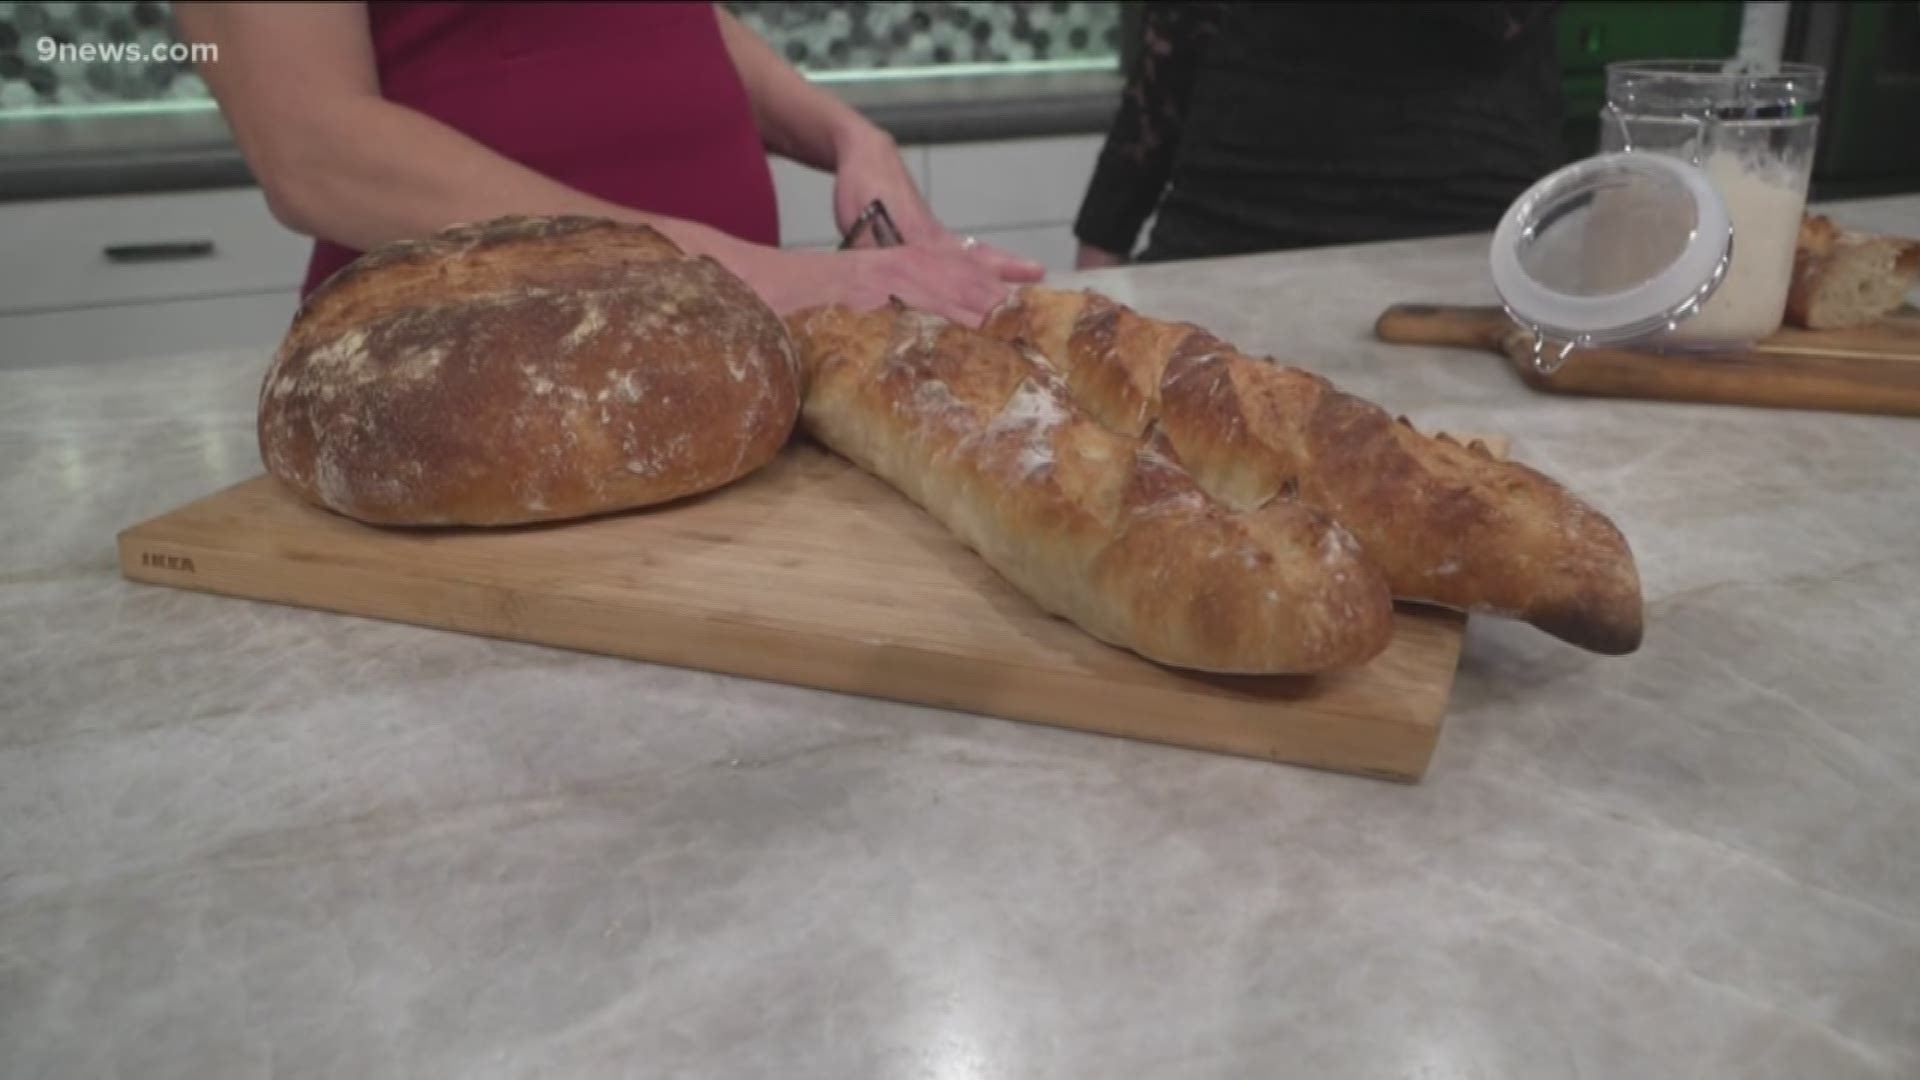 In Mediterranean diets, sourdough bread is a staple. 
Nutritionist Malena Perdomo explain some of the benefits.